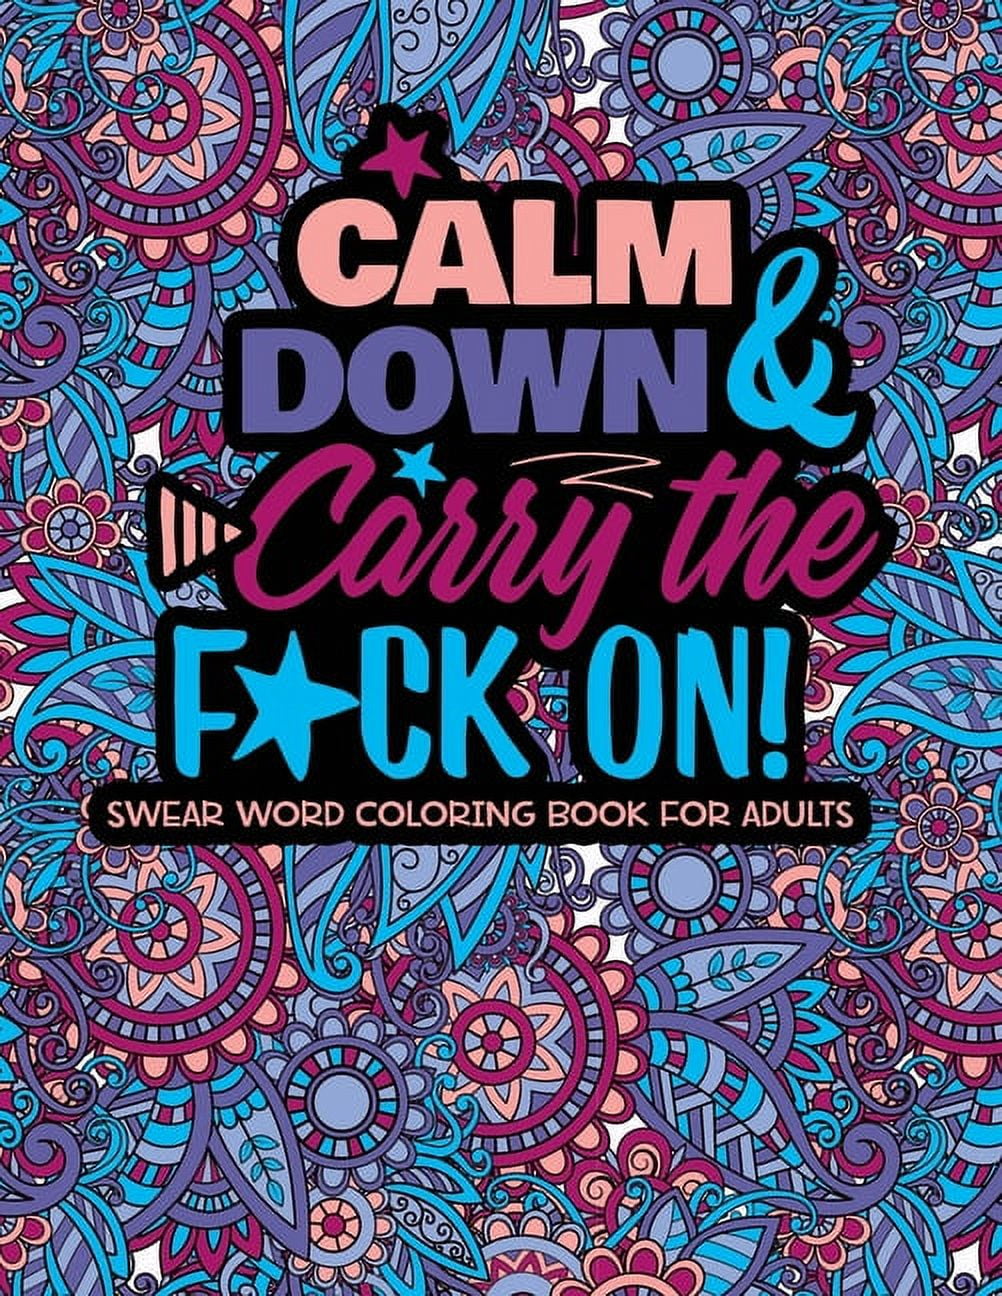 Swear Word Coloring Book: Anxiety and Stress Relief Coloring Book For  Adults, Teens & Grownups । Best Anxiety Relief Coloring Book । (Paperback)